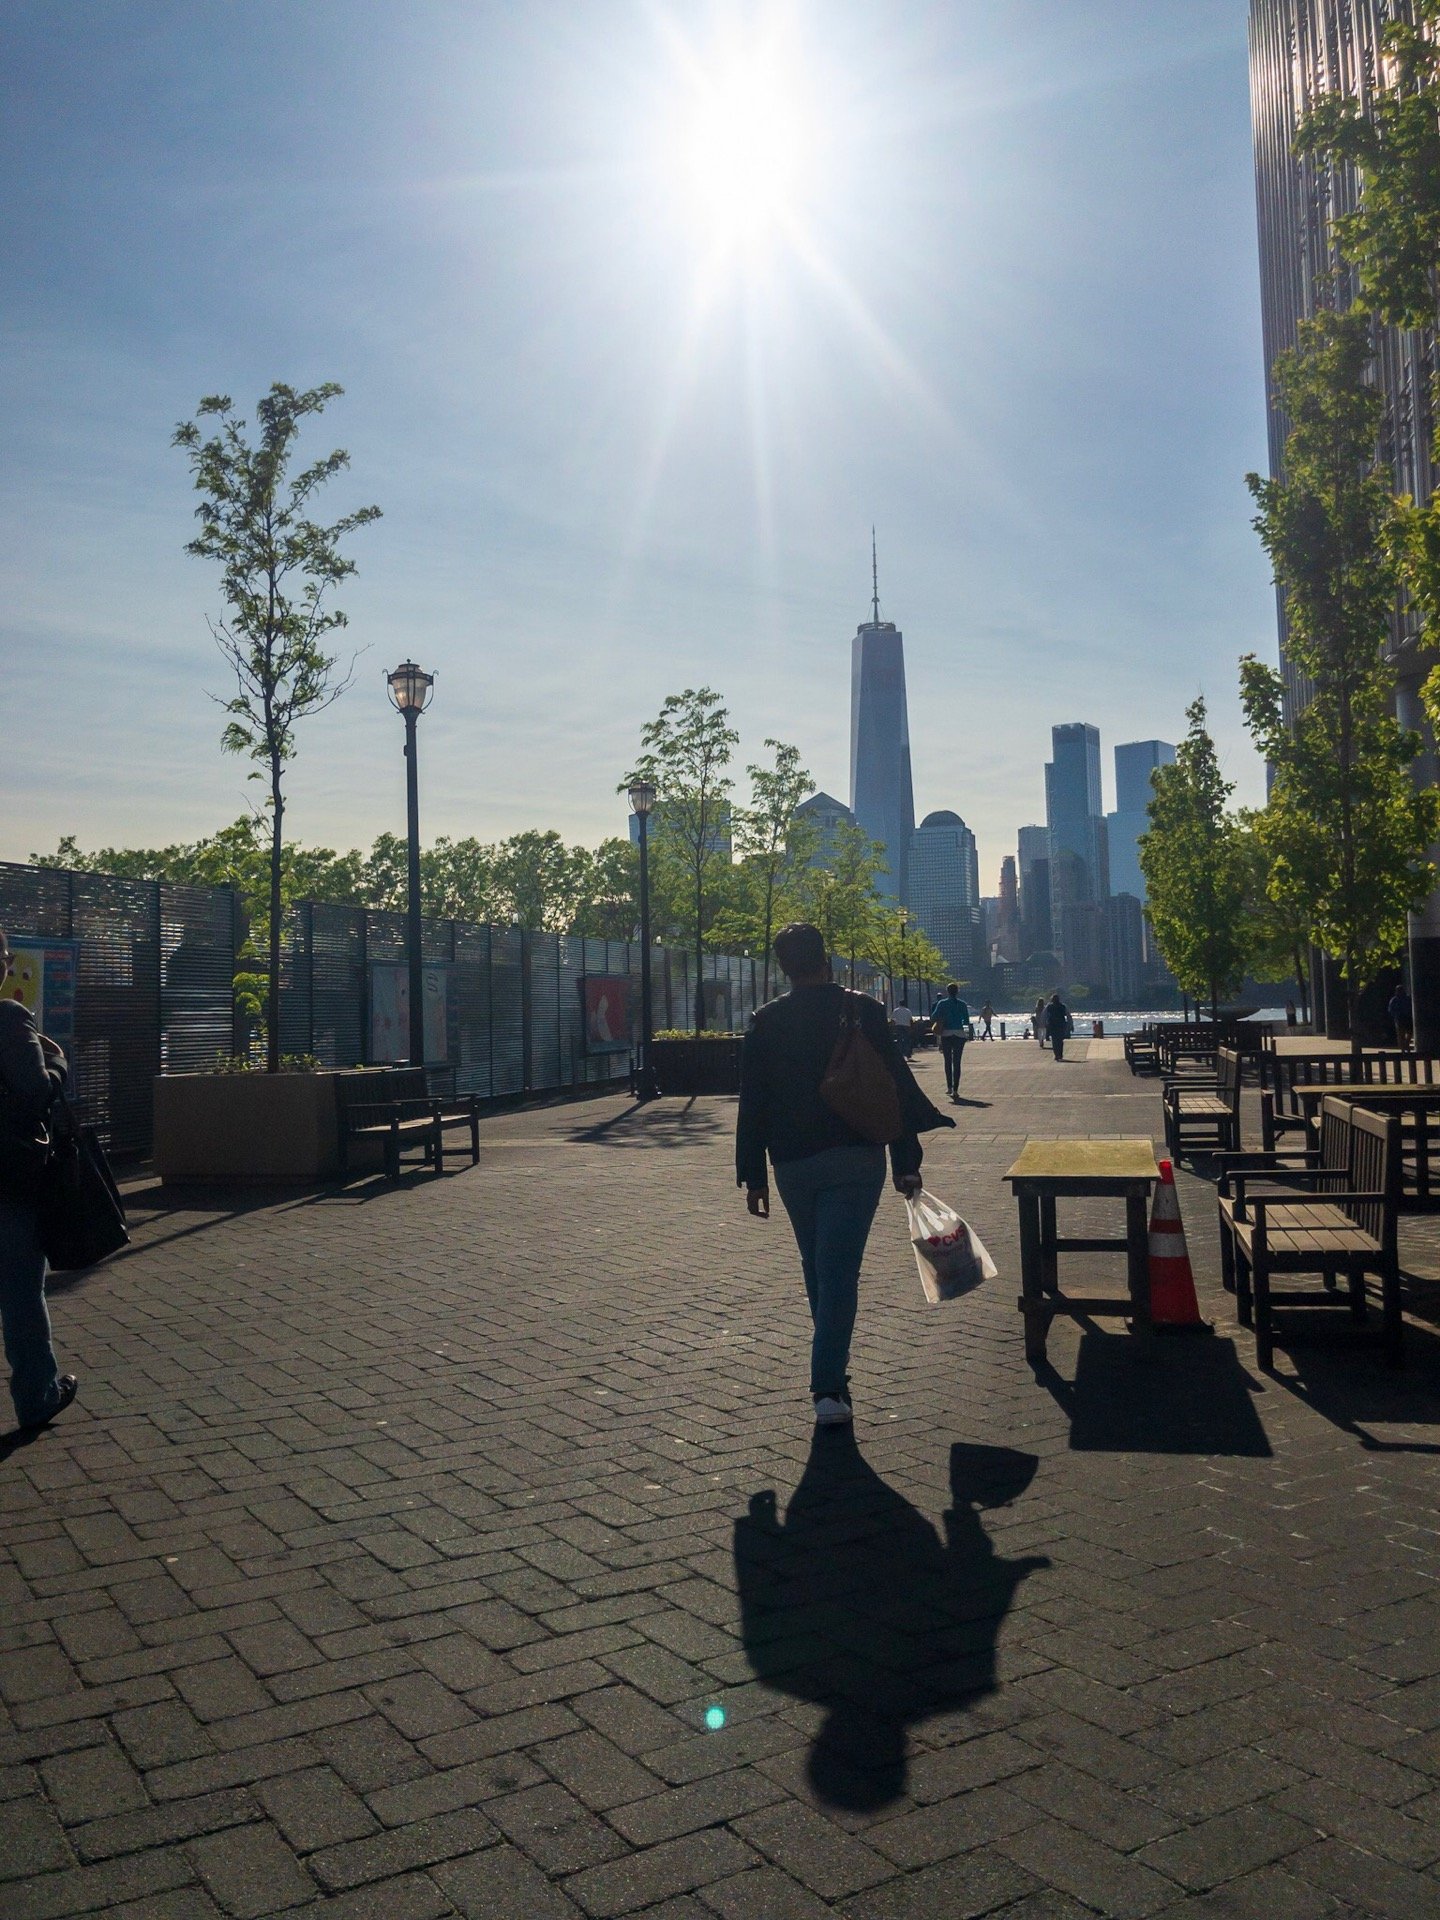 Walking to the NY Waterway Ferry Terminal at Paulus Hook